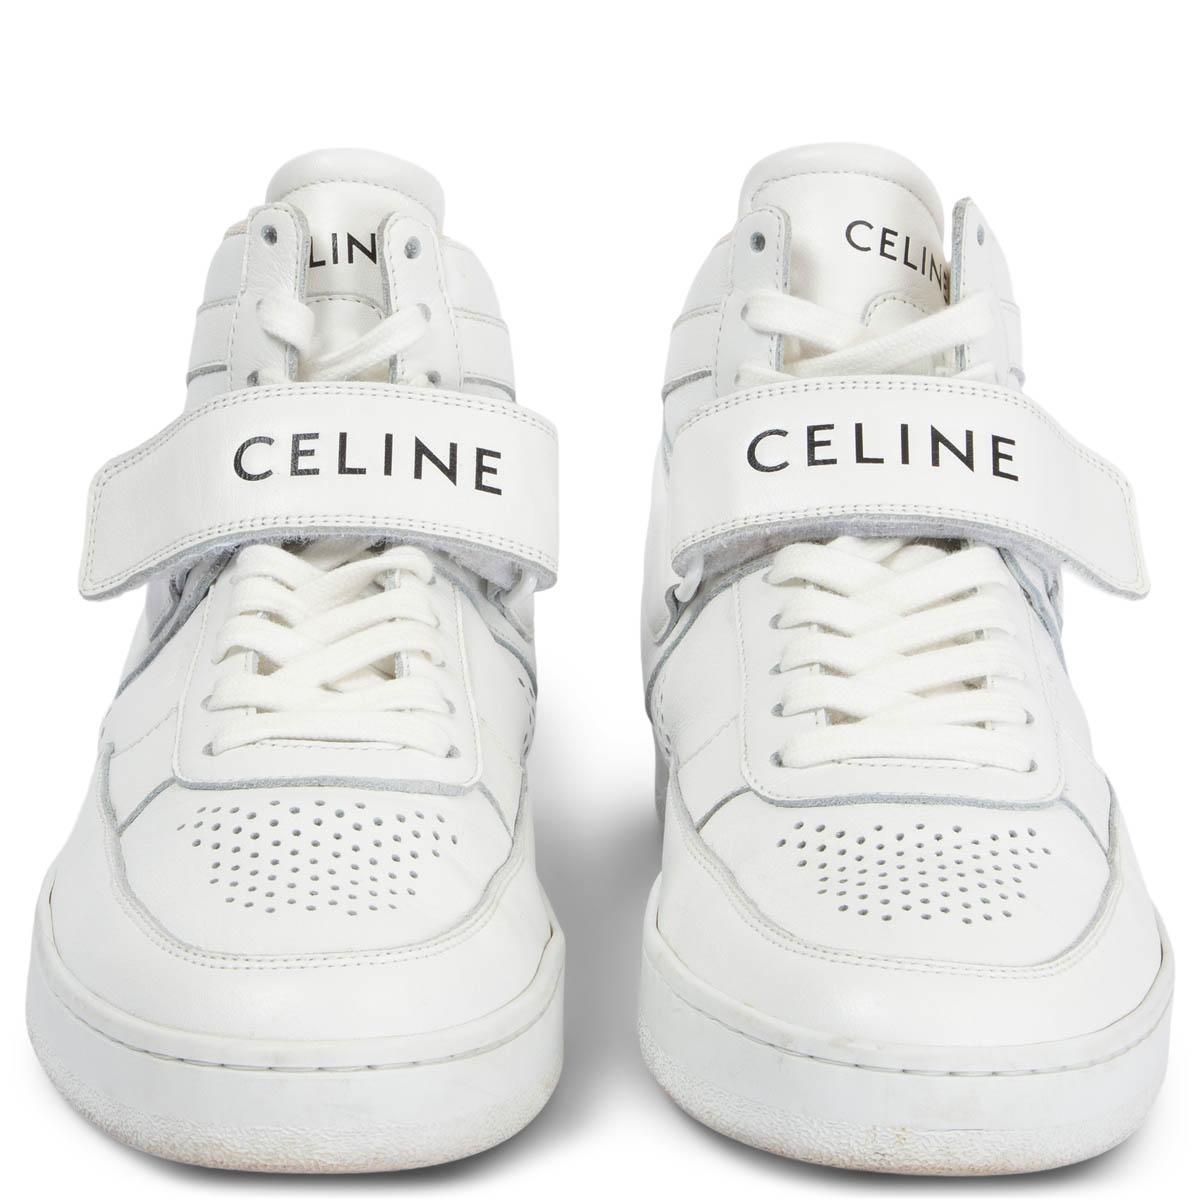 100% authentic Celine CT-03 high-top sneaker in white calfskin with thin perforations on the upper and logo embossed heel and velcro fastening. Celine debossed signature on the external side of the outsole. Side trimmings with graphic lines. White